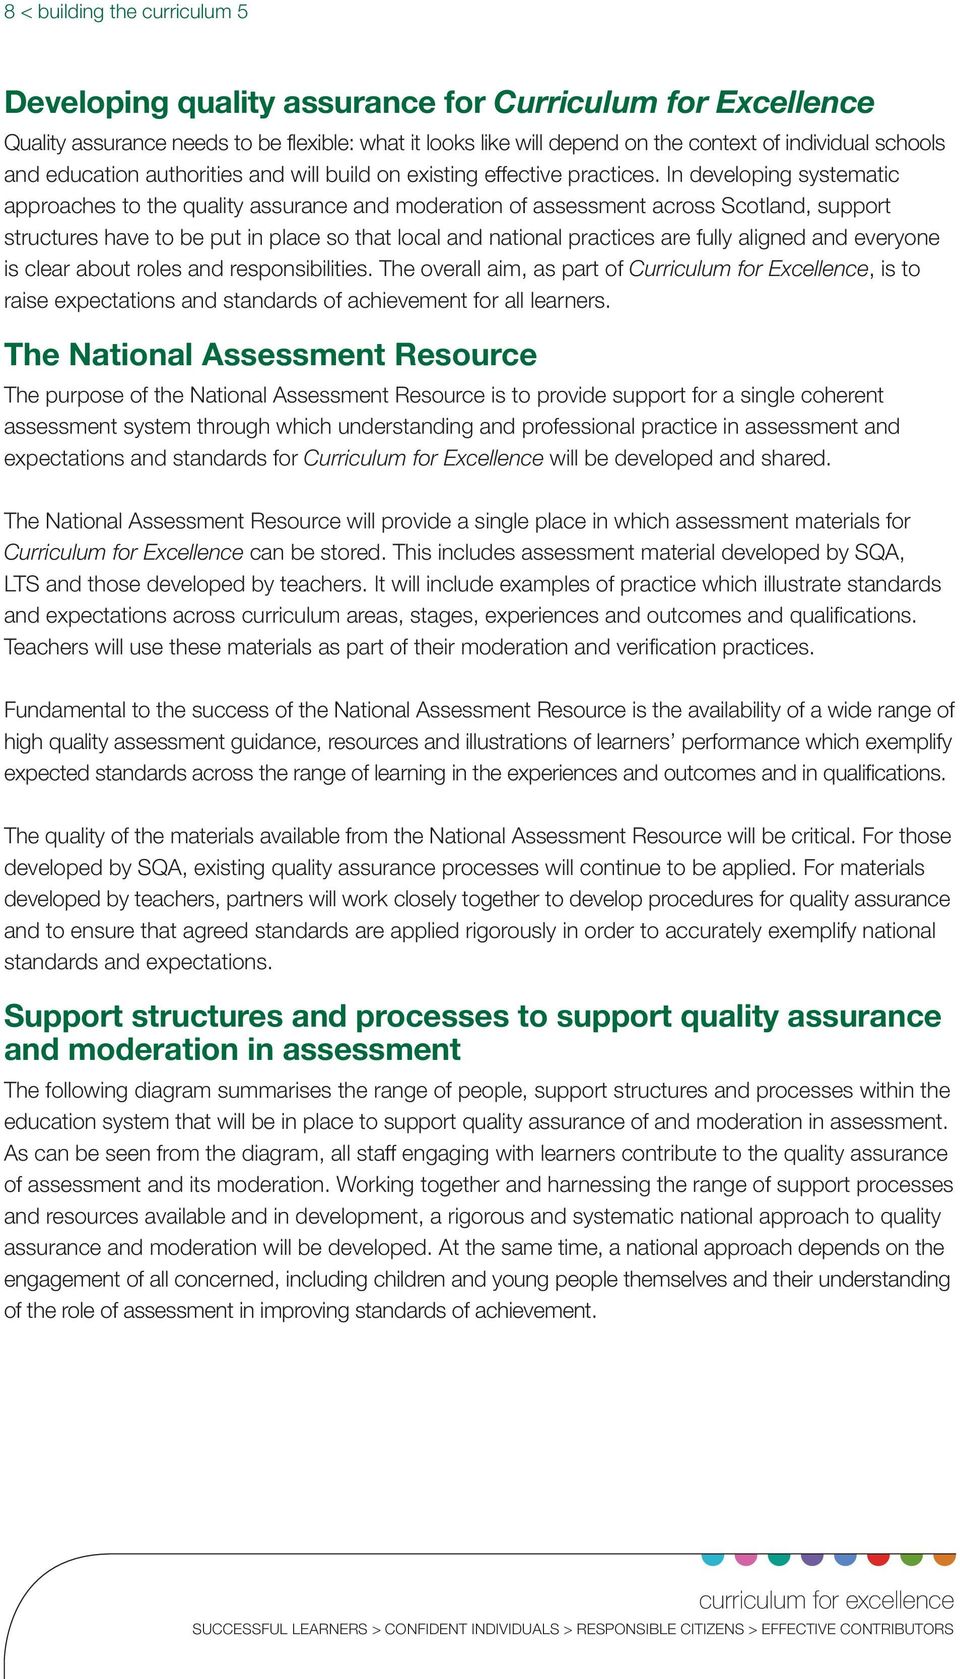 In developing systematic approaches to the quality assurance and moderation of assessment across Scotland, support structures have to be put in place so that local and national practices are fully